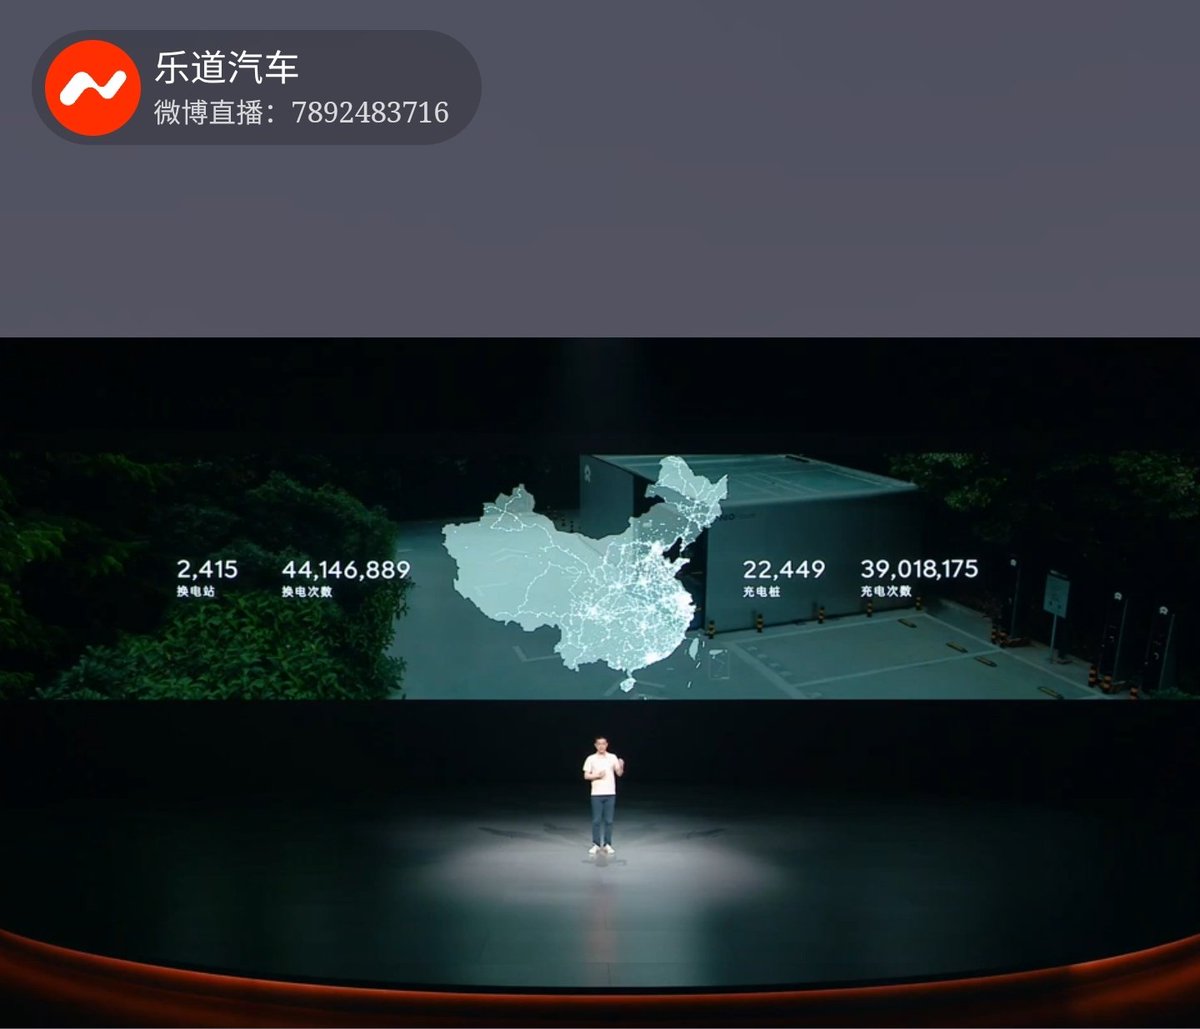 It has now started! The link is here! $NIO weibo.com/l/wblive/m/sho…